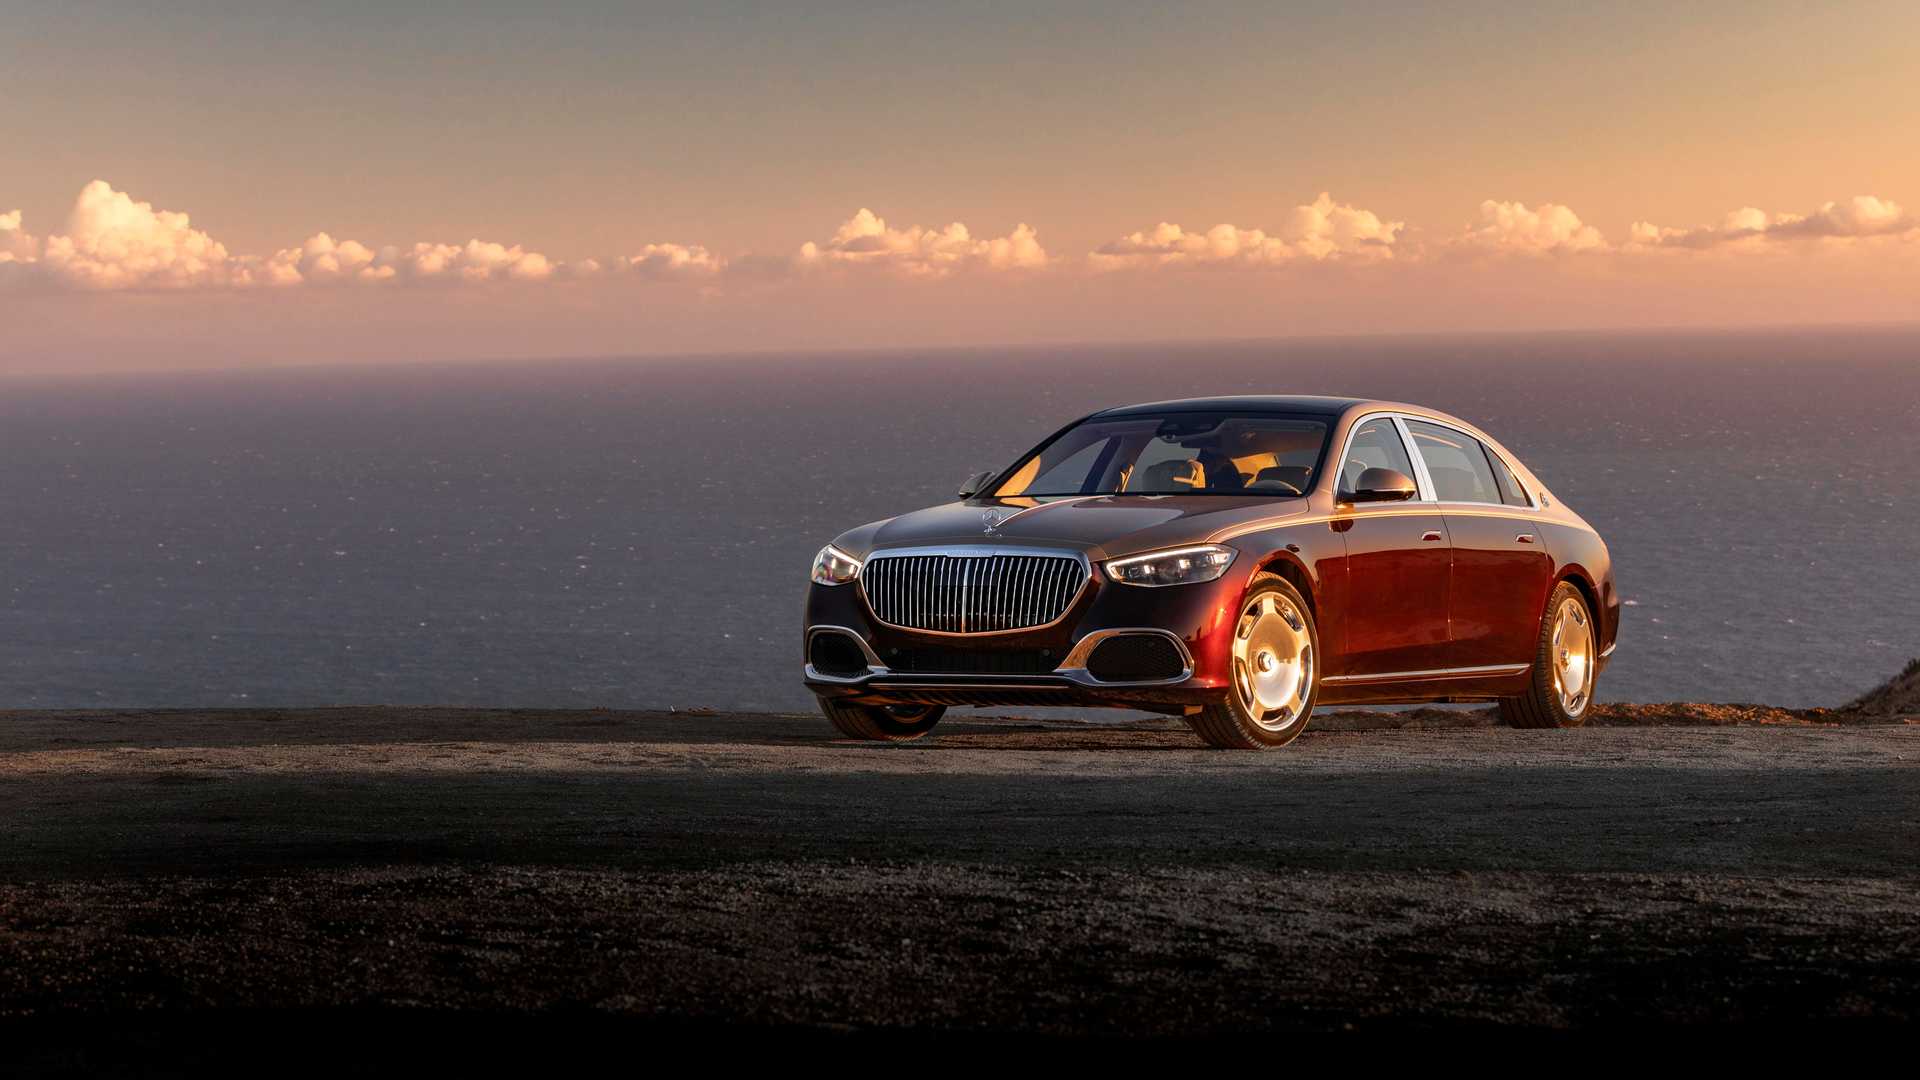 Mercedes Maybach S Class Costs $600 More Than Benz Model